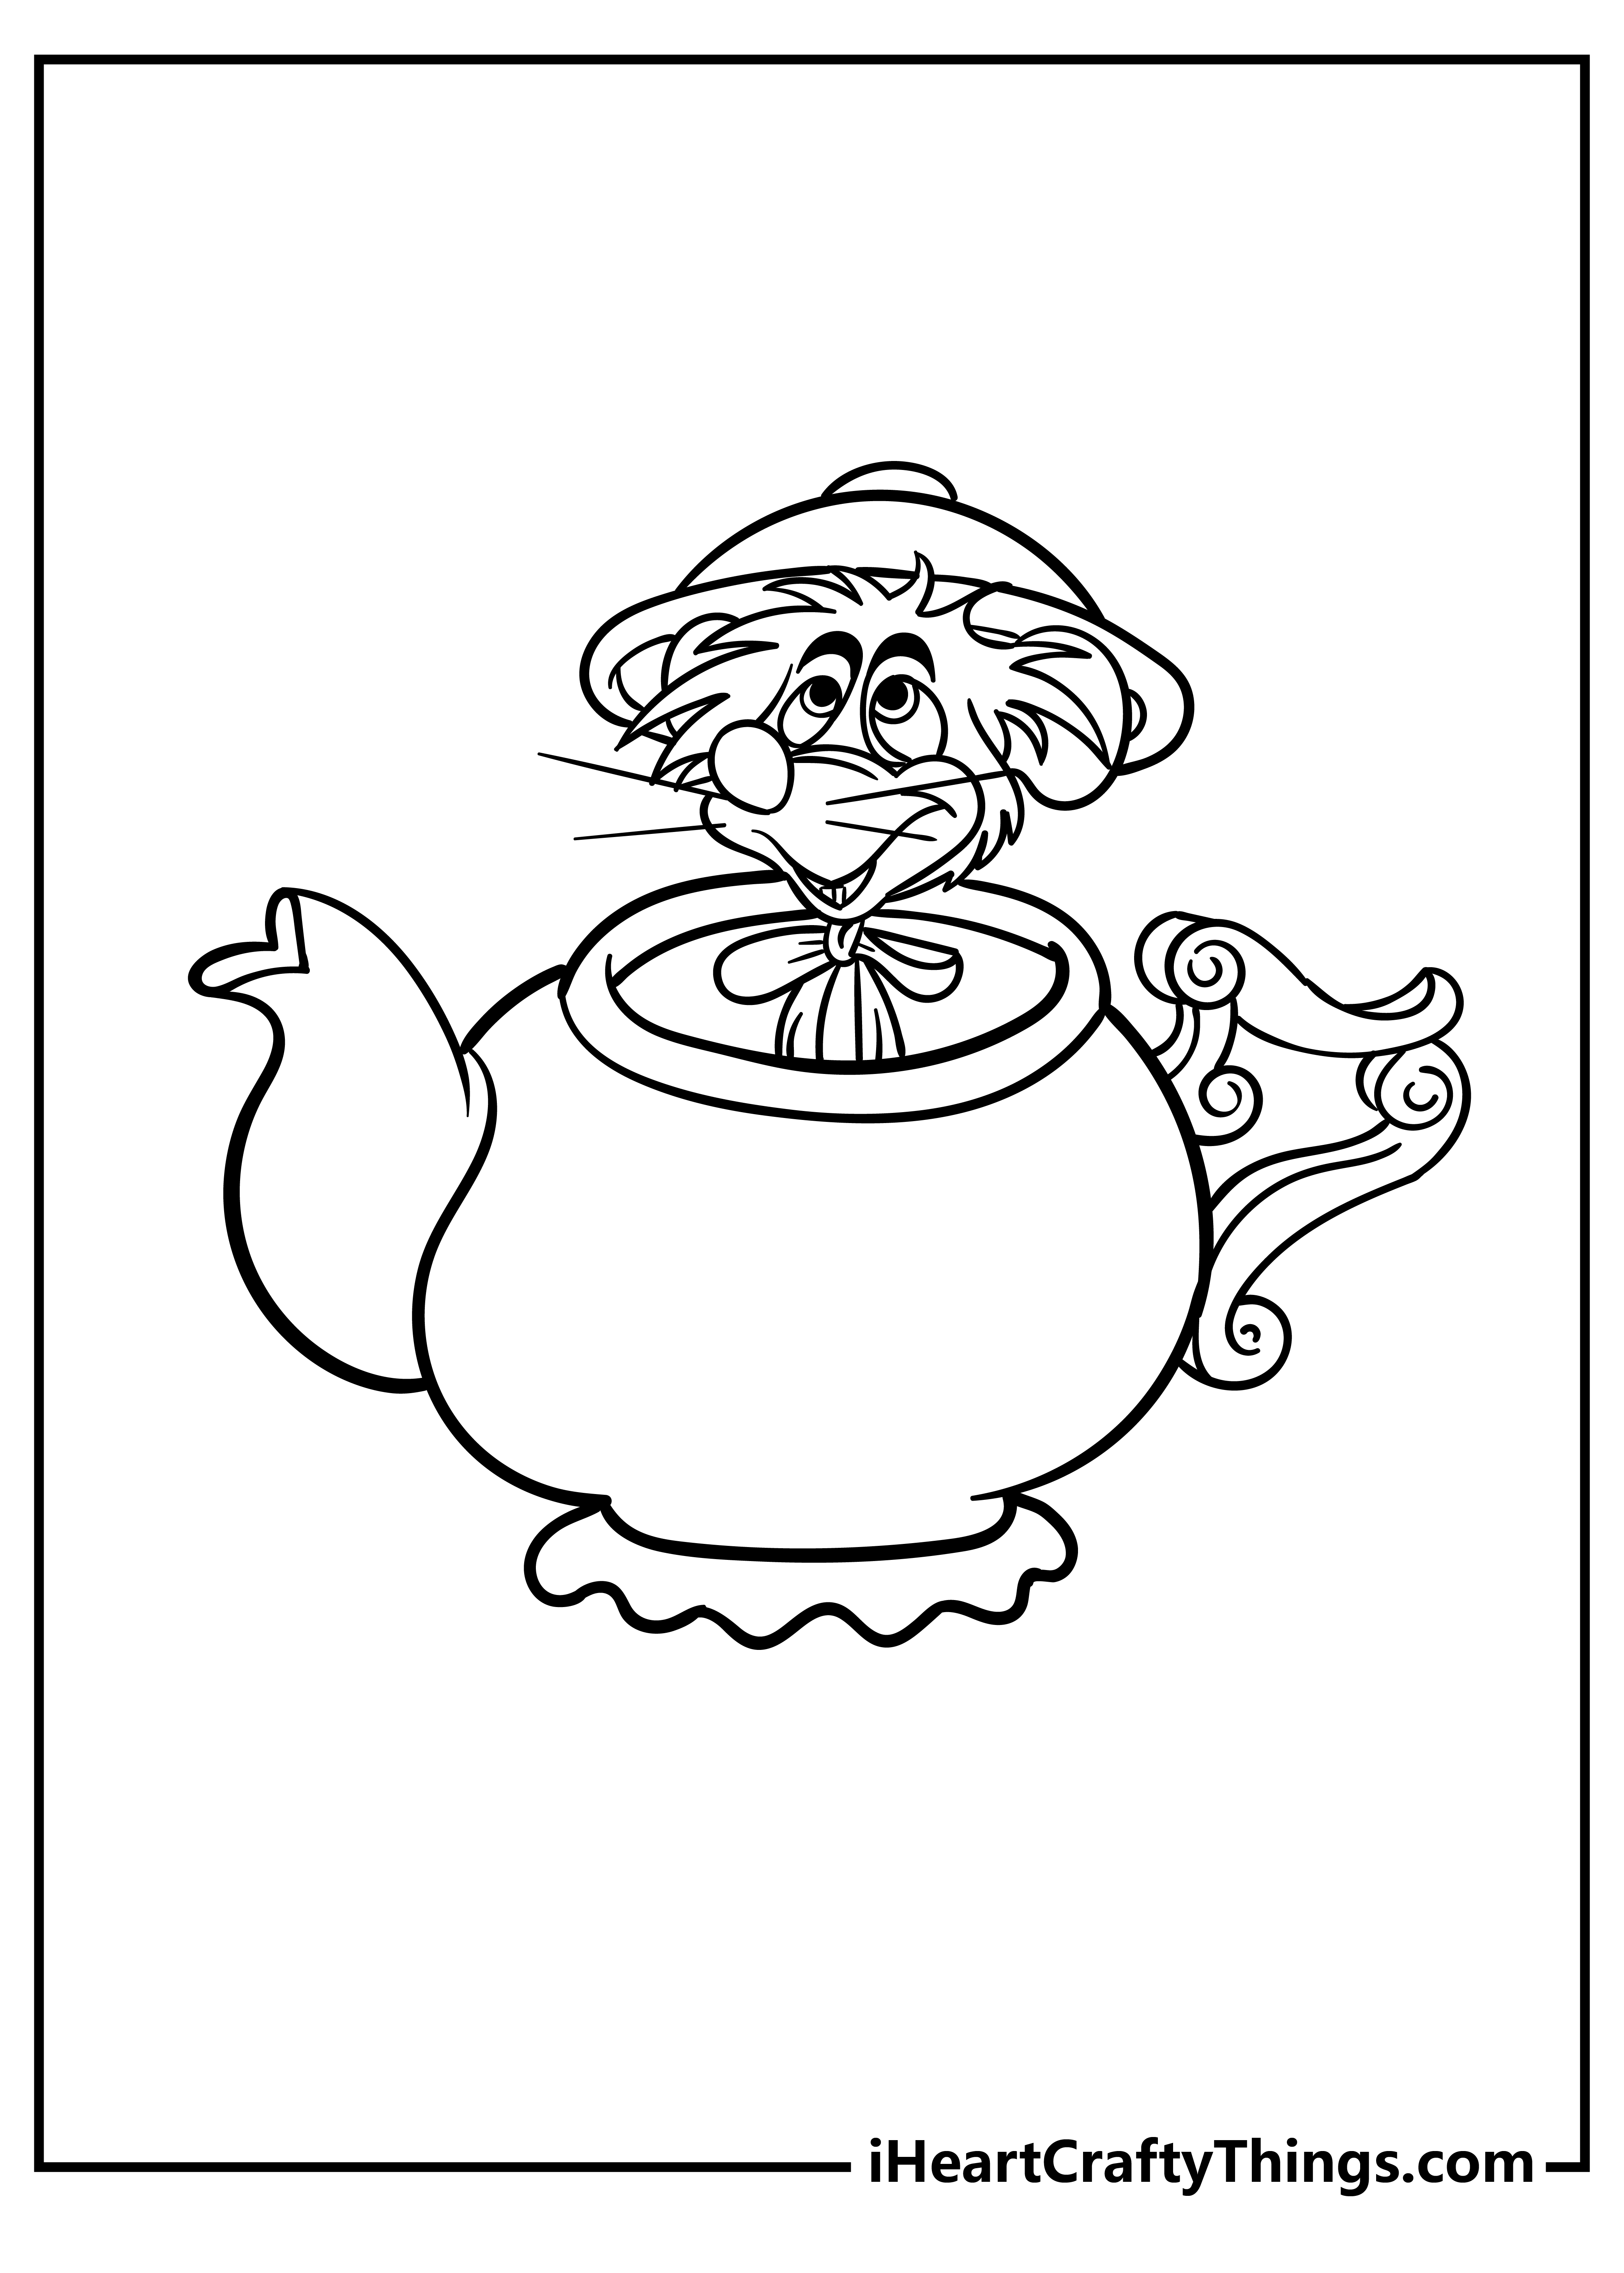 Alice In Wonderland Coloring Book for adults free download